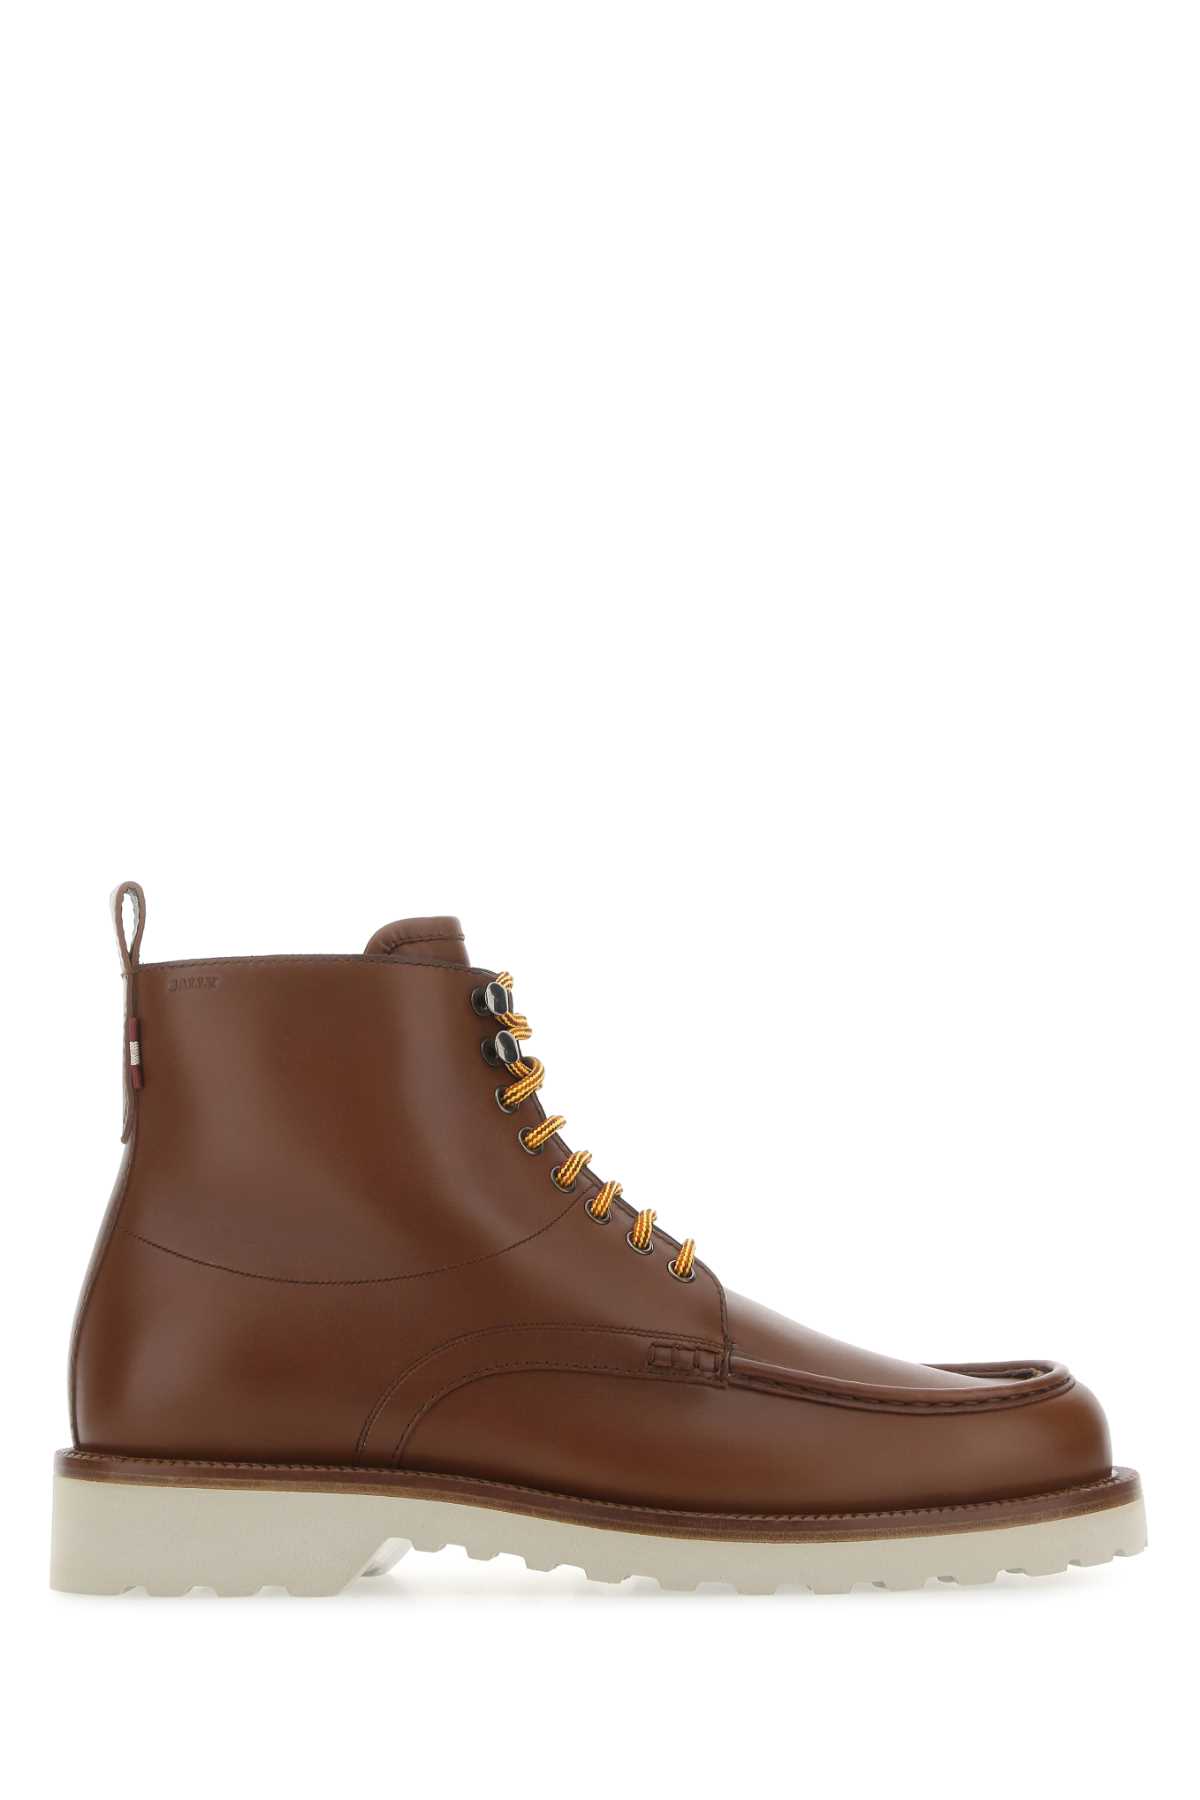 Bally Zenor leather boots - Brown